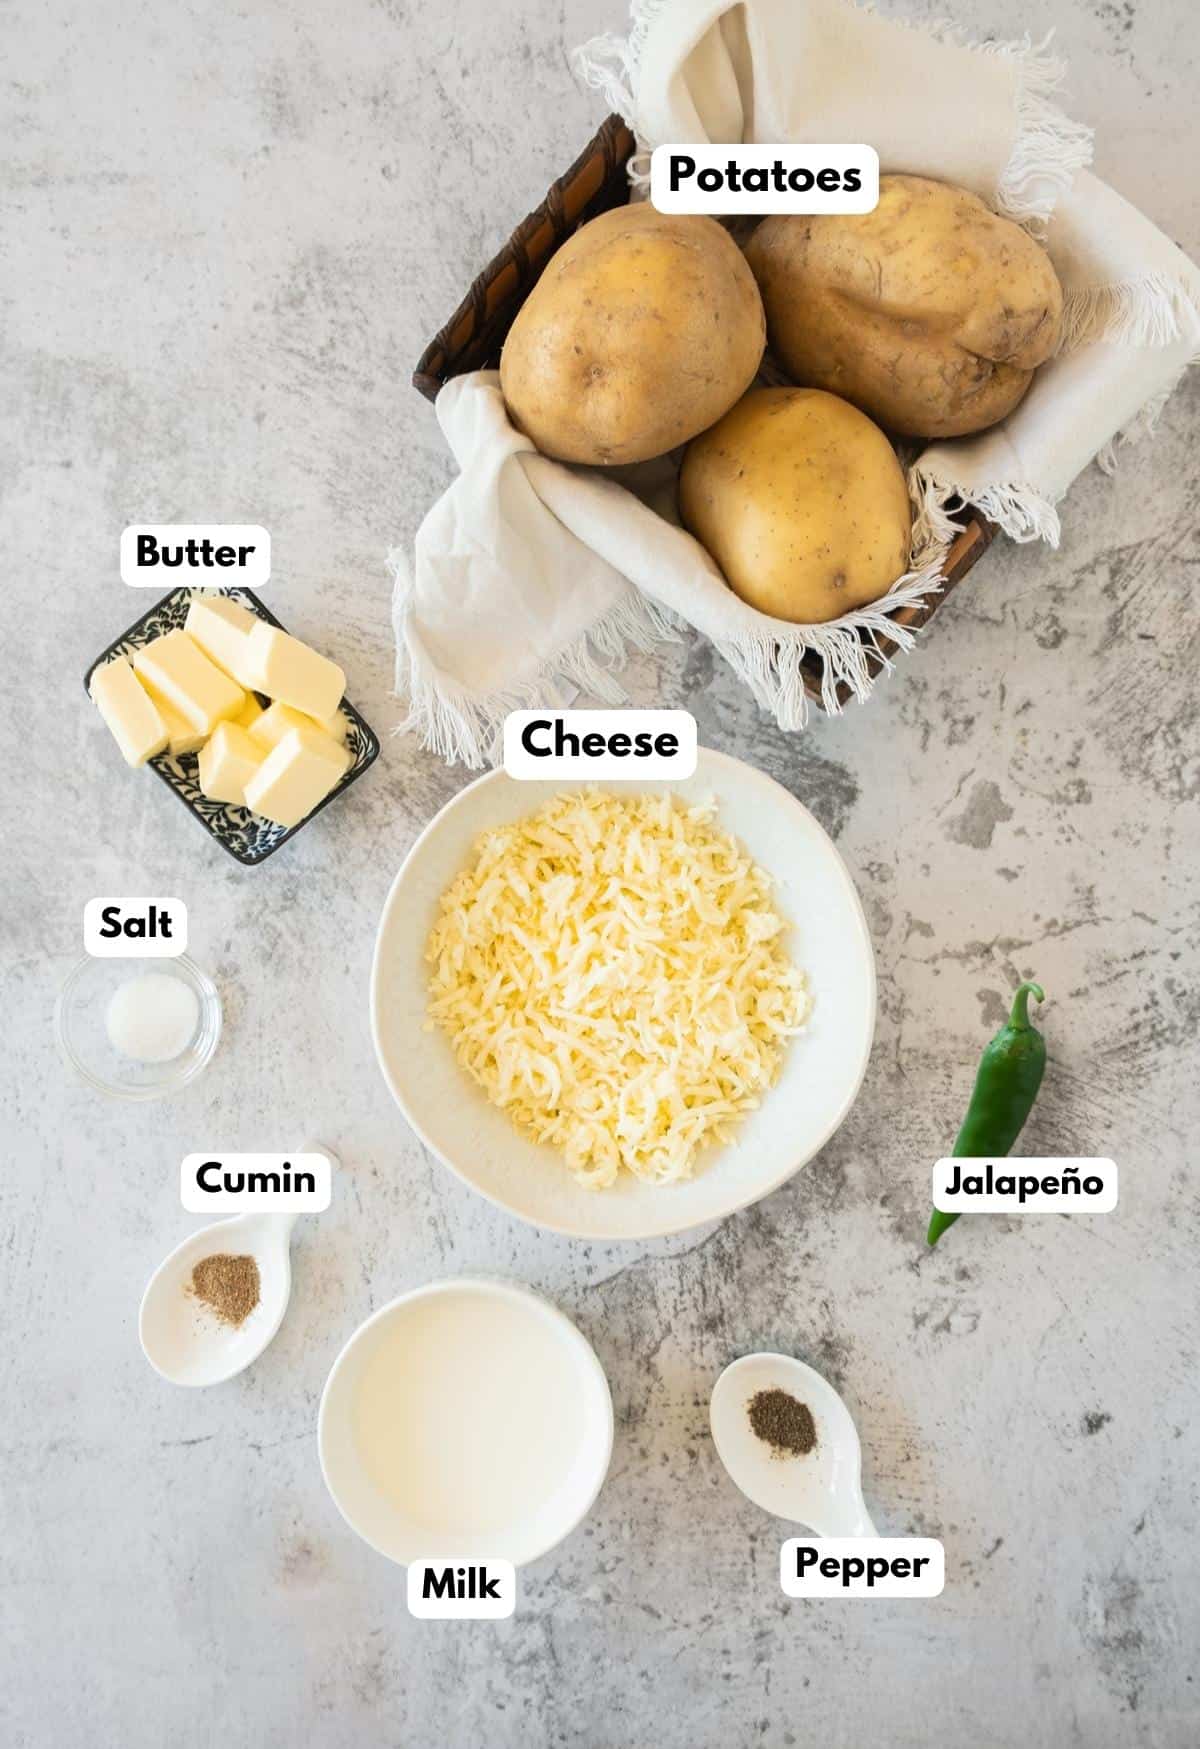 The ingredients needed to make the recipe.